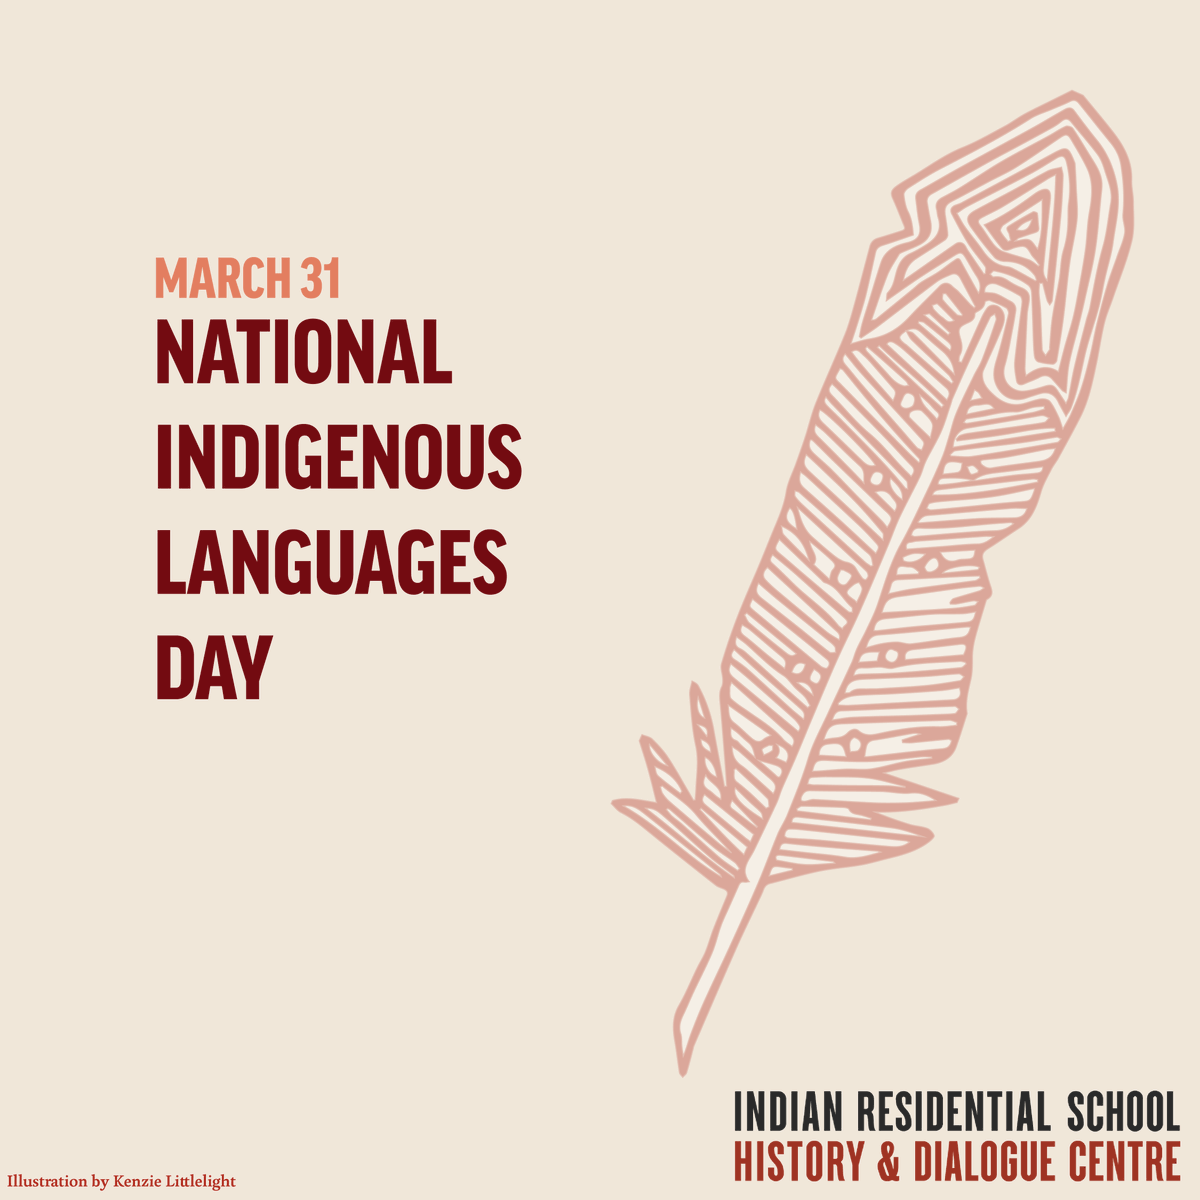 March 31 is National Indigenous Languages Day - a day to recognize the importance of language revitalization and acknowledge those working towards it.